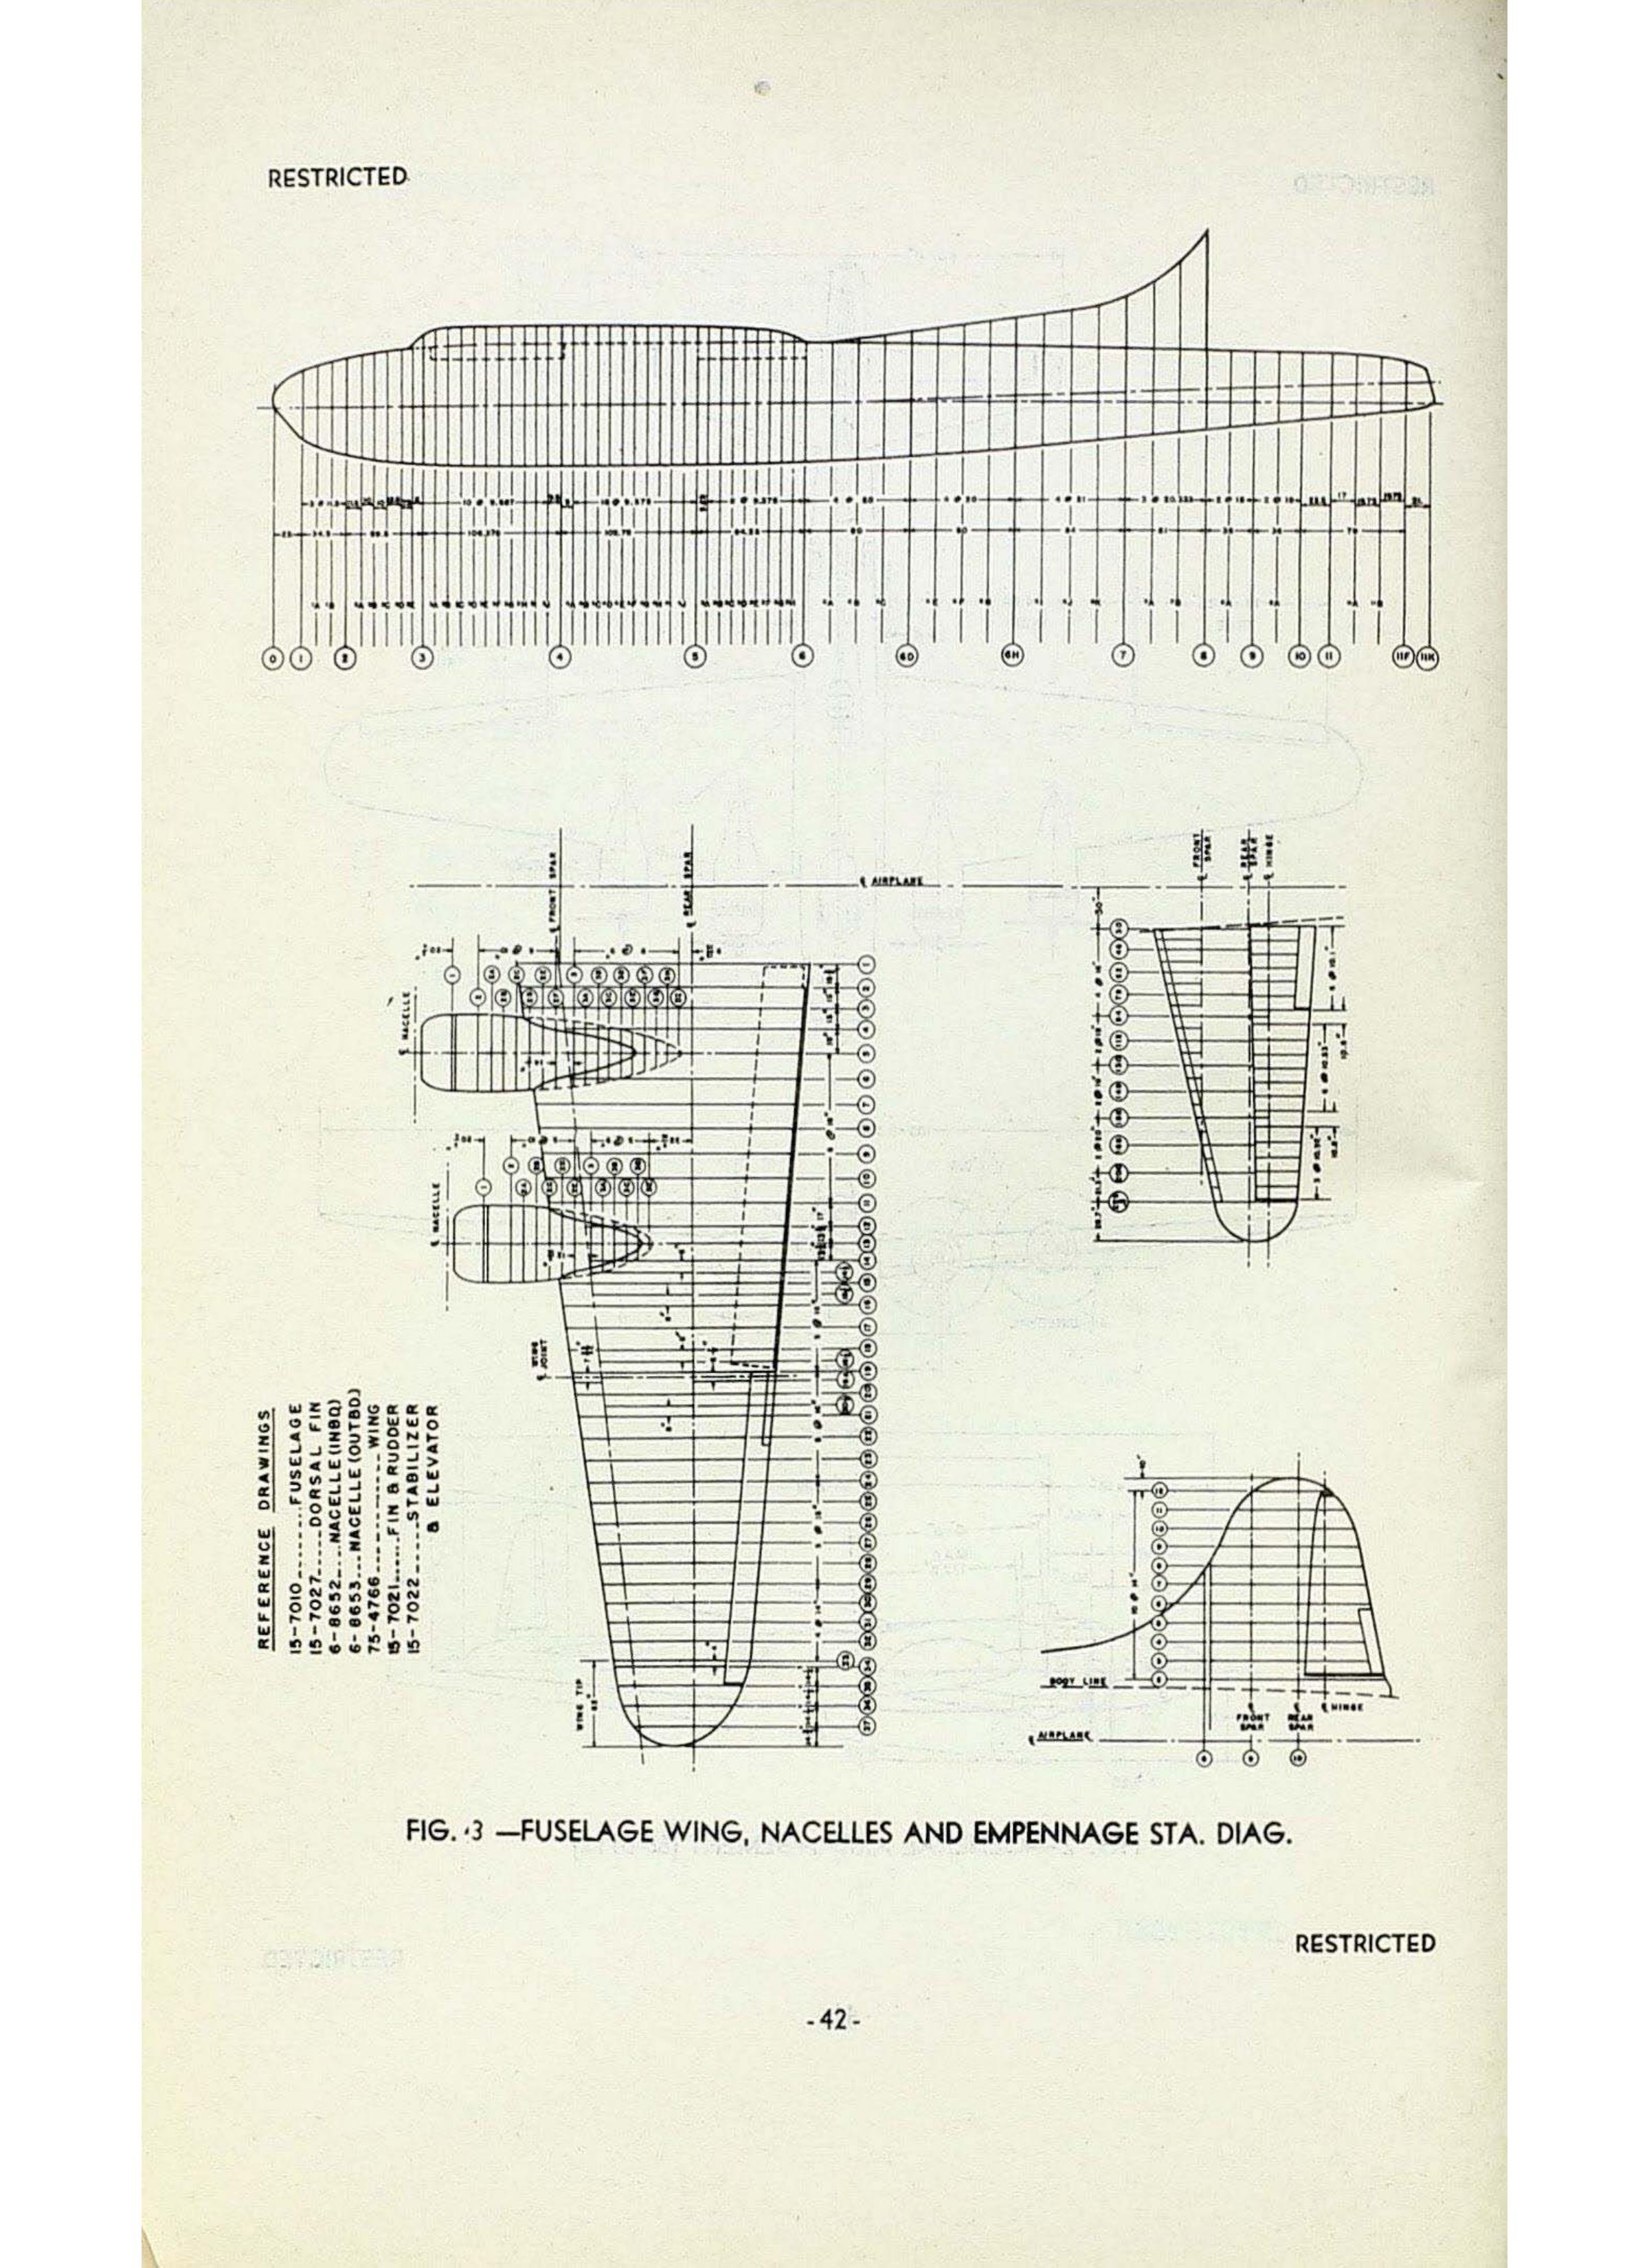 Sample page  42 from AirCorps Library document: Boeing B-17F Maintenance Familiarization Manual 